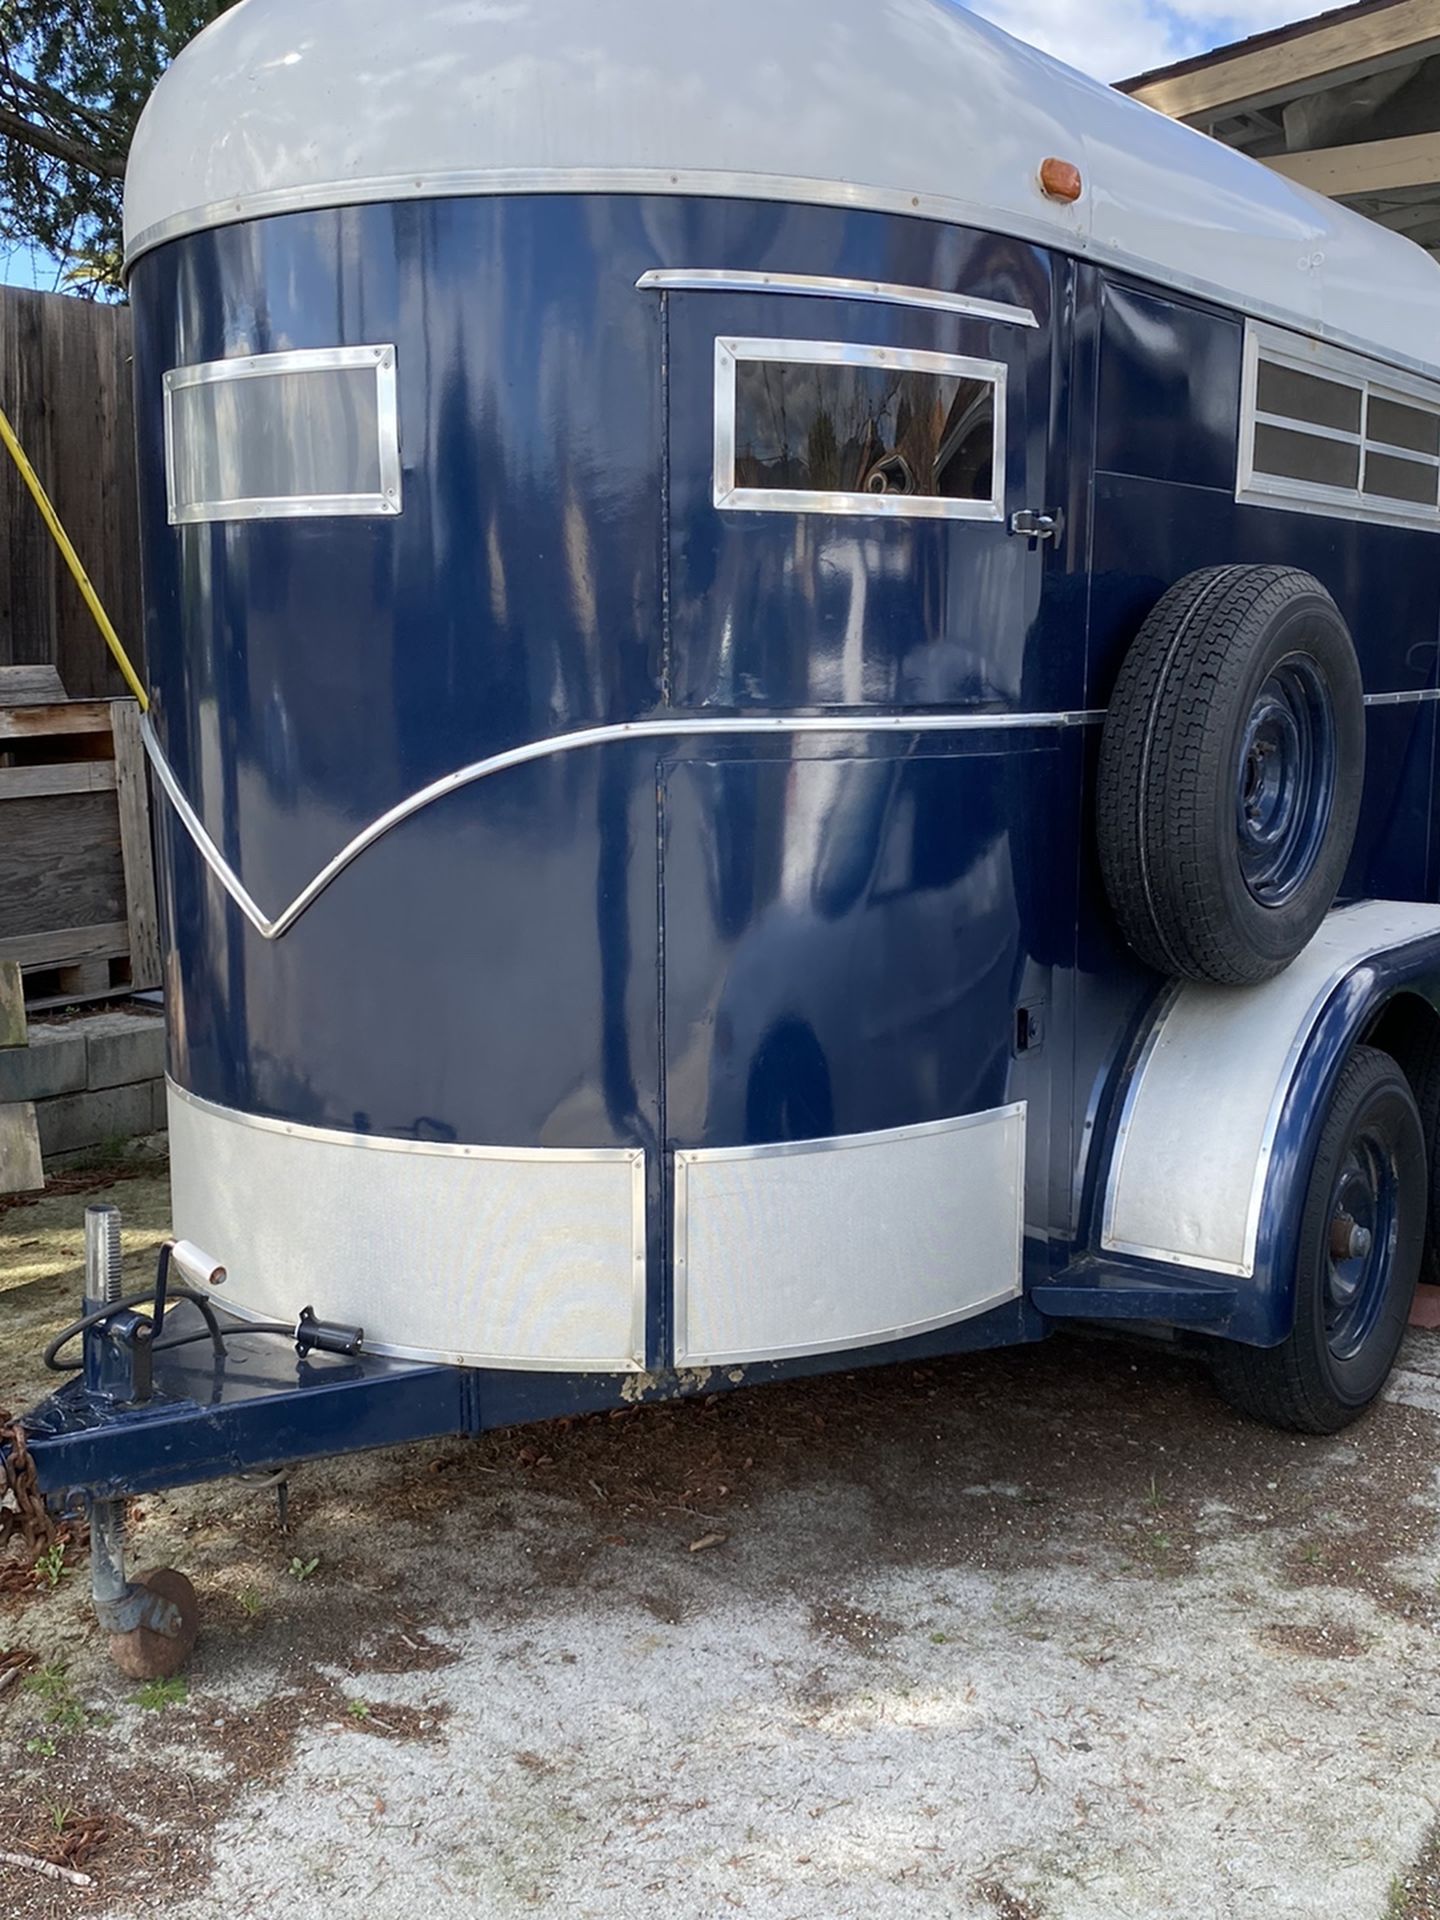 1975 Horse Trailer - New Tires Purchased January 2020